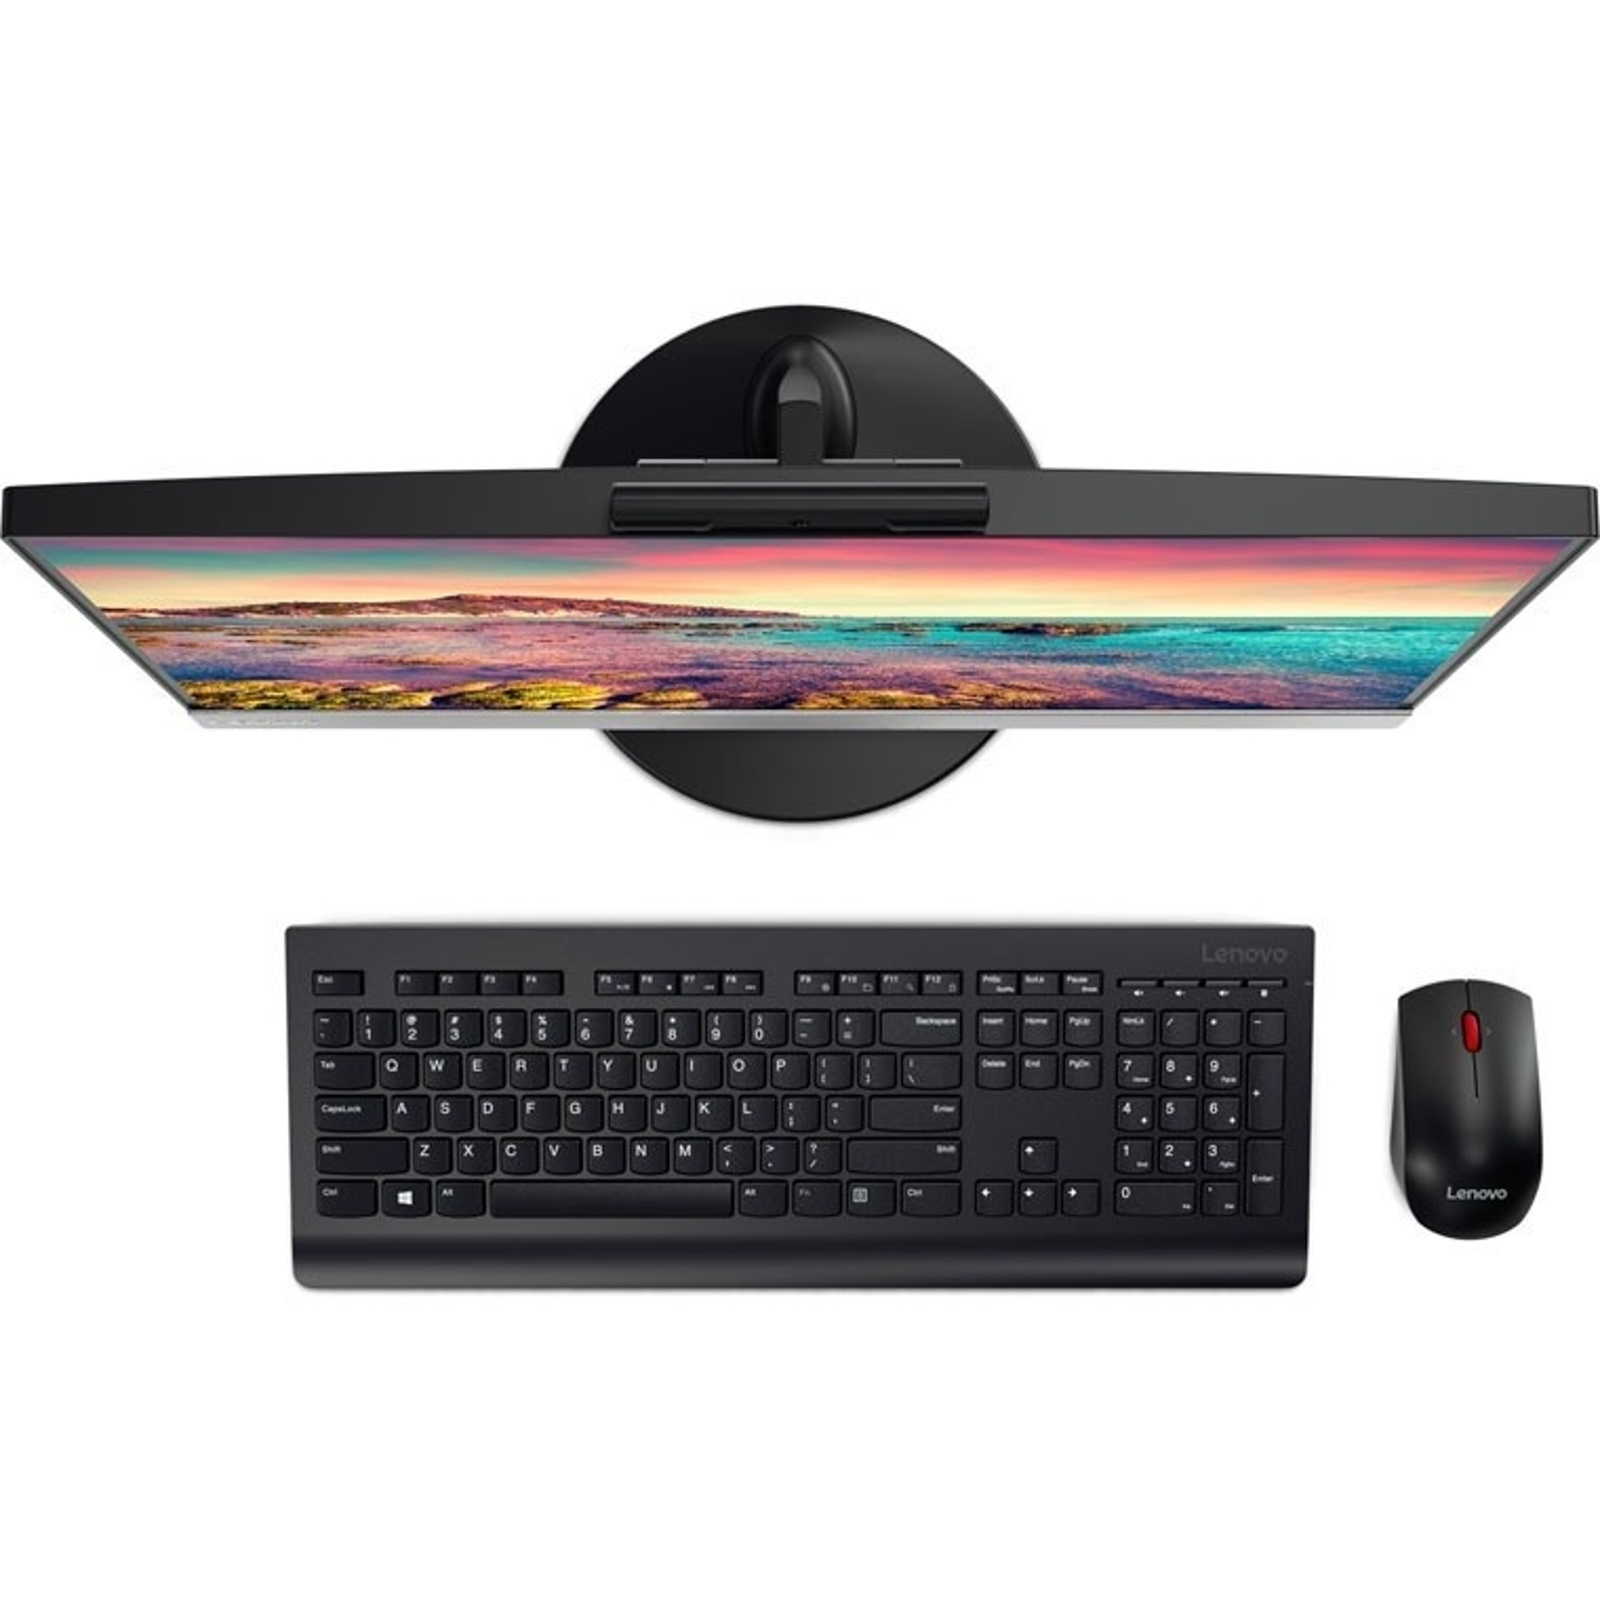 LENOVO V410z 10QV001FTX i5-7400T 4GB 500GB O/B VGA 21.5" NONTOUCH FREDOOS SIYAH ALL IN ONE PC